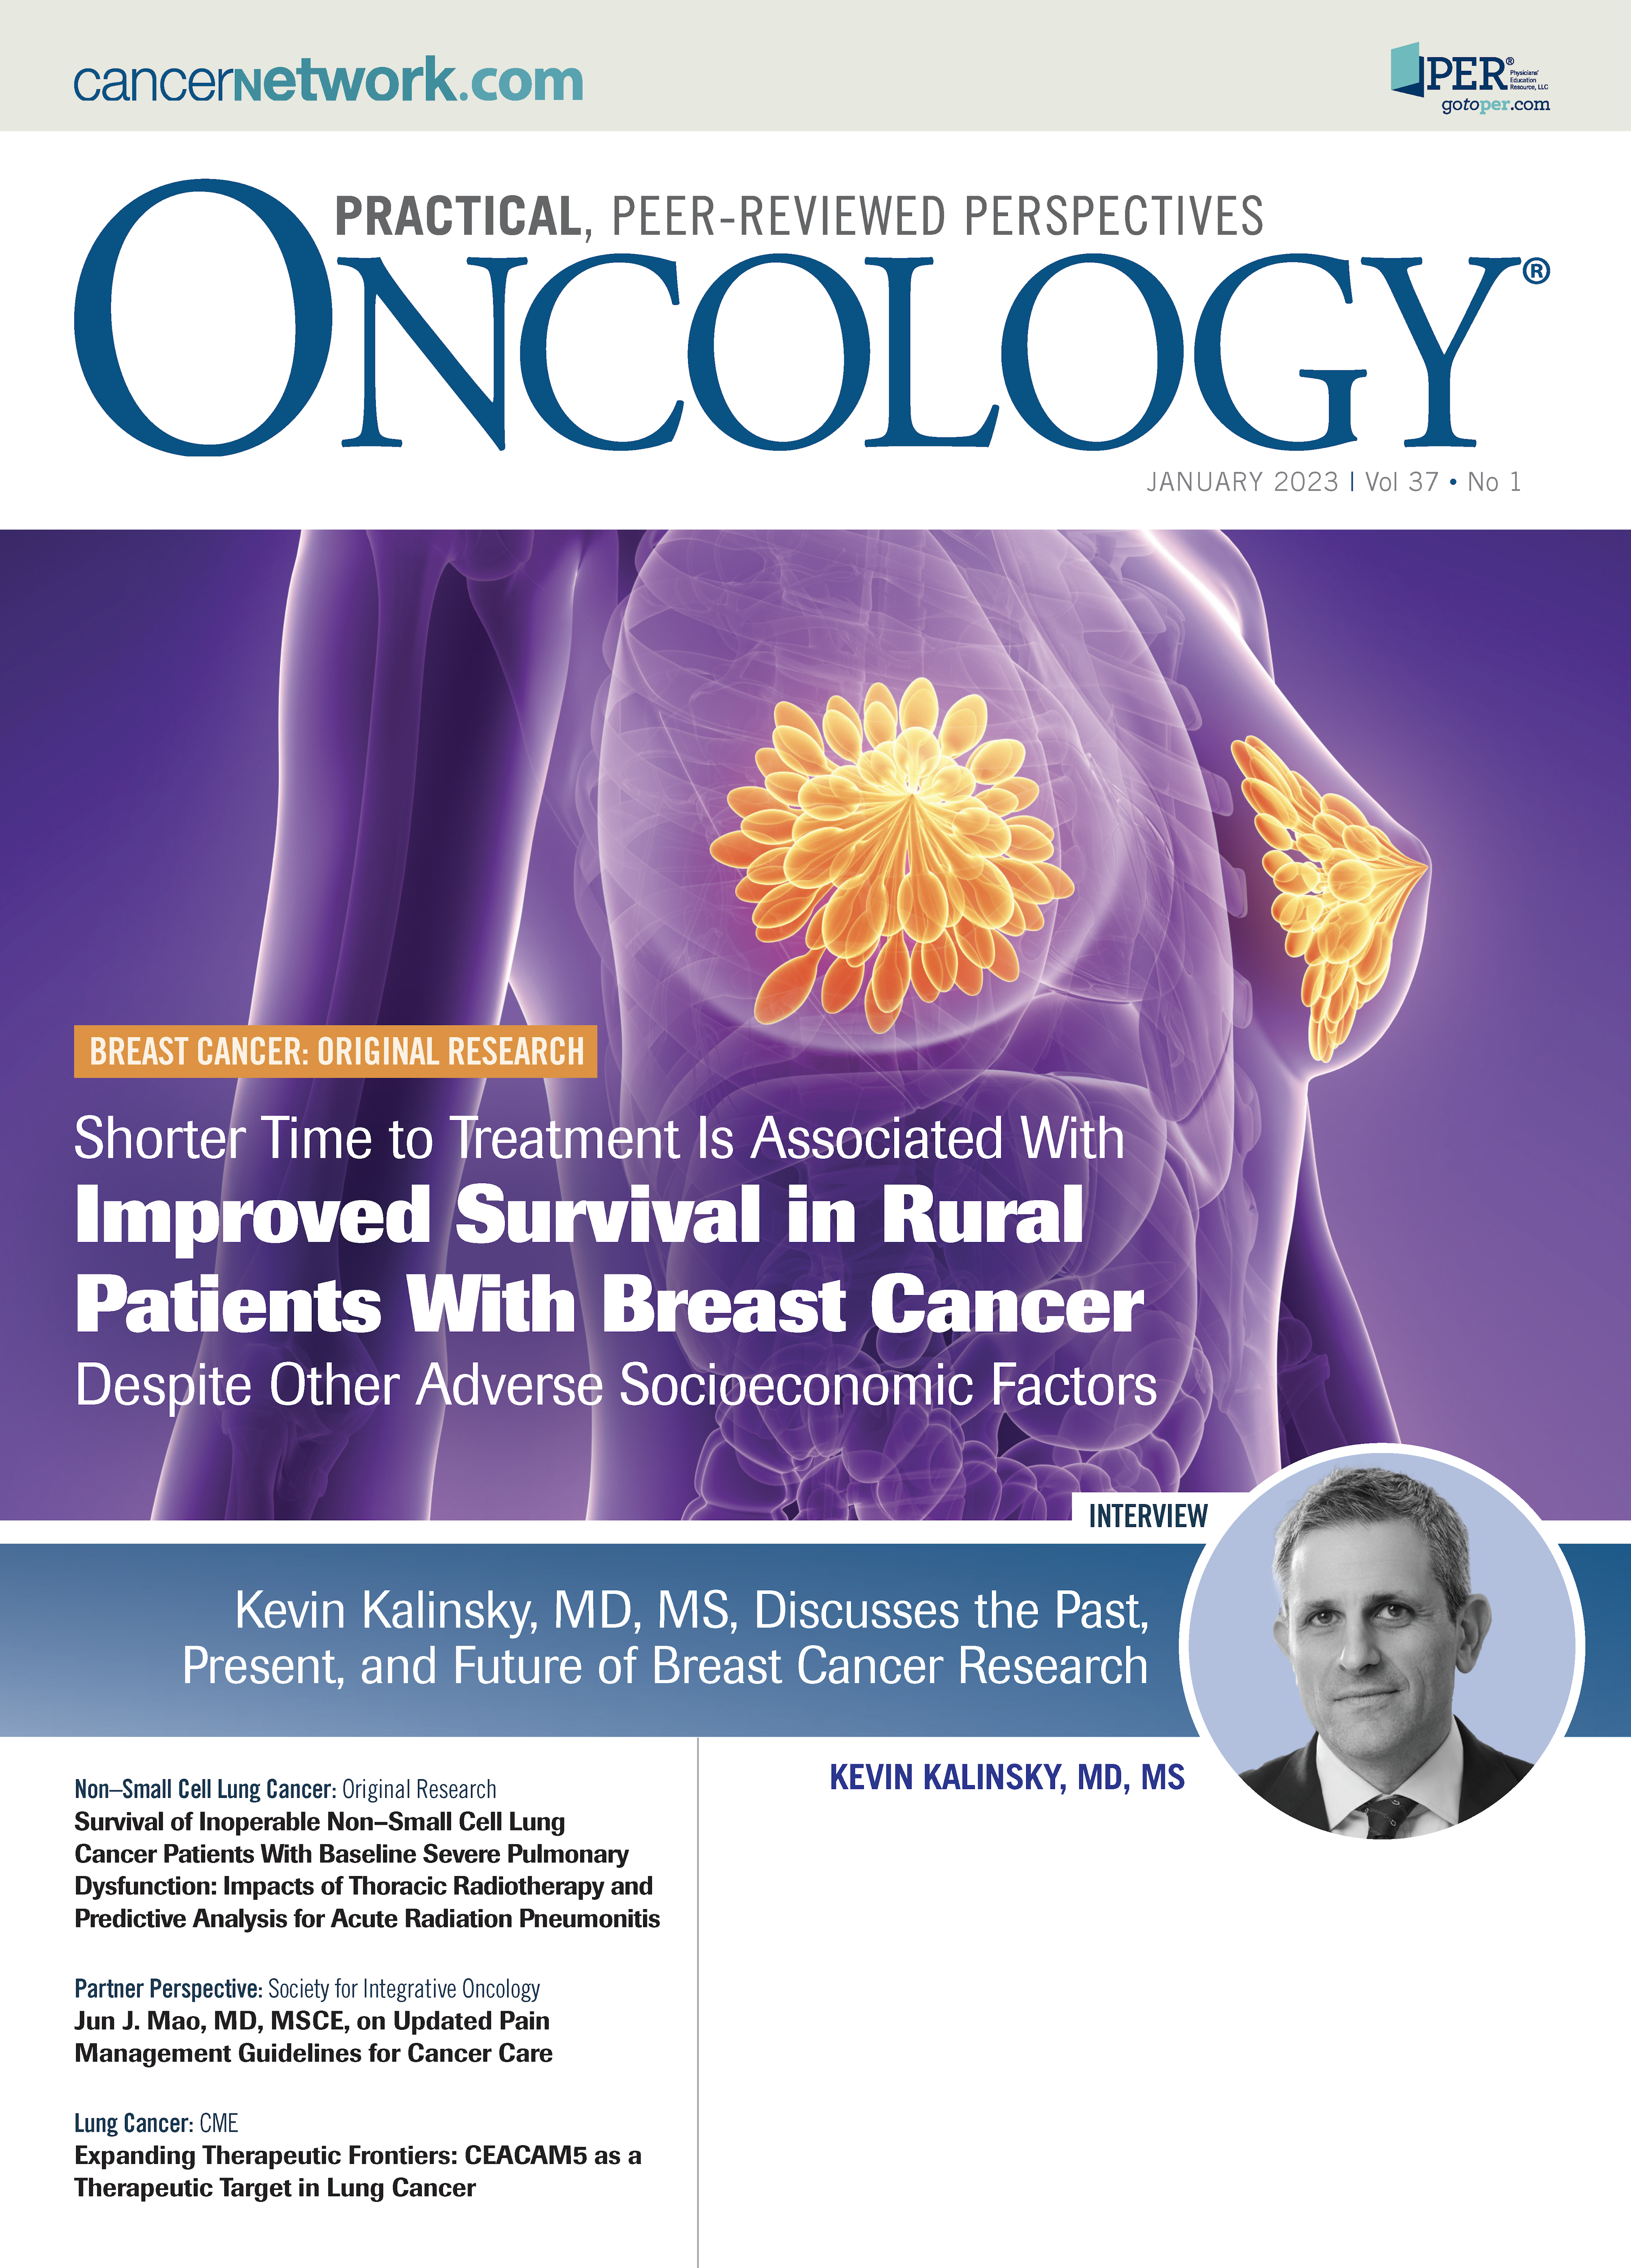 ONCOLOGY Vol 37, Issue 1